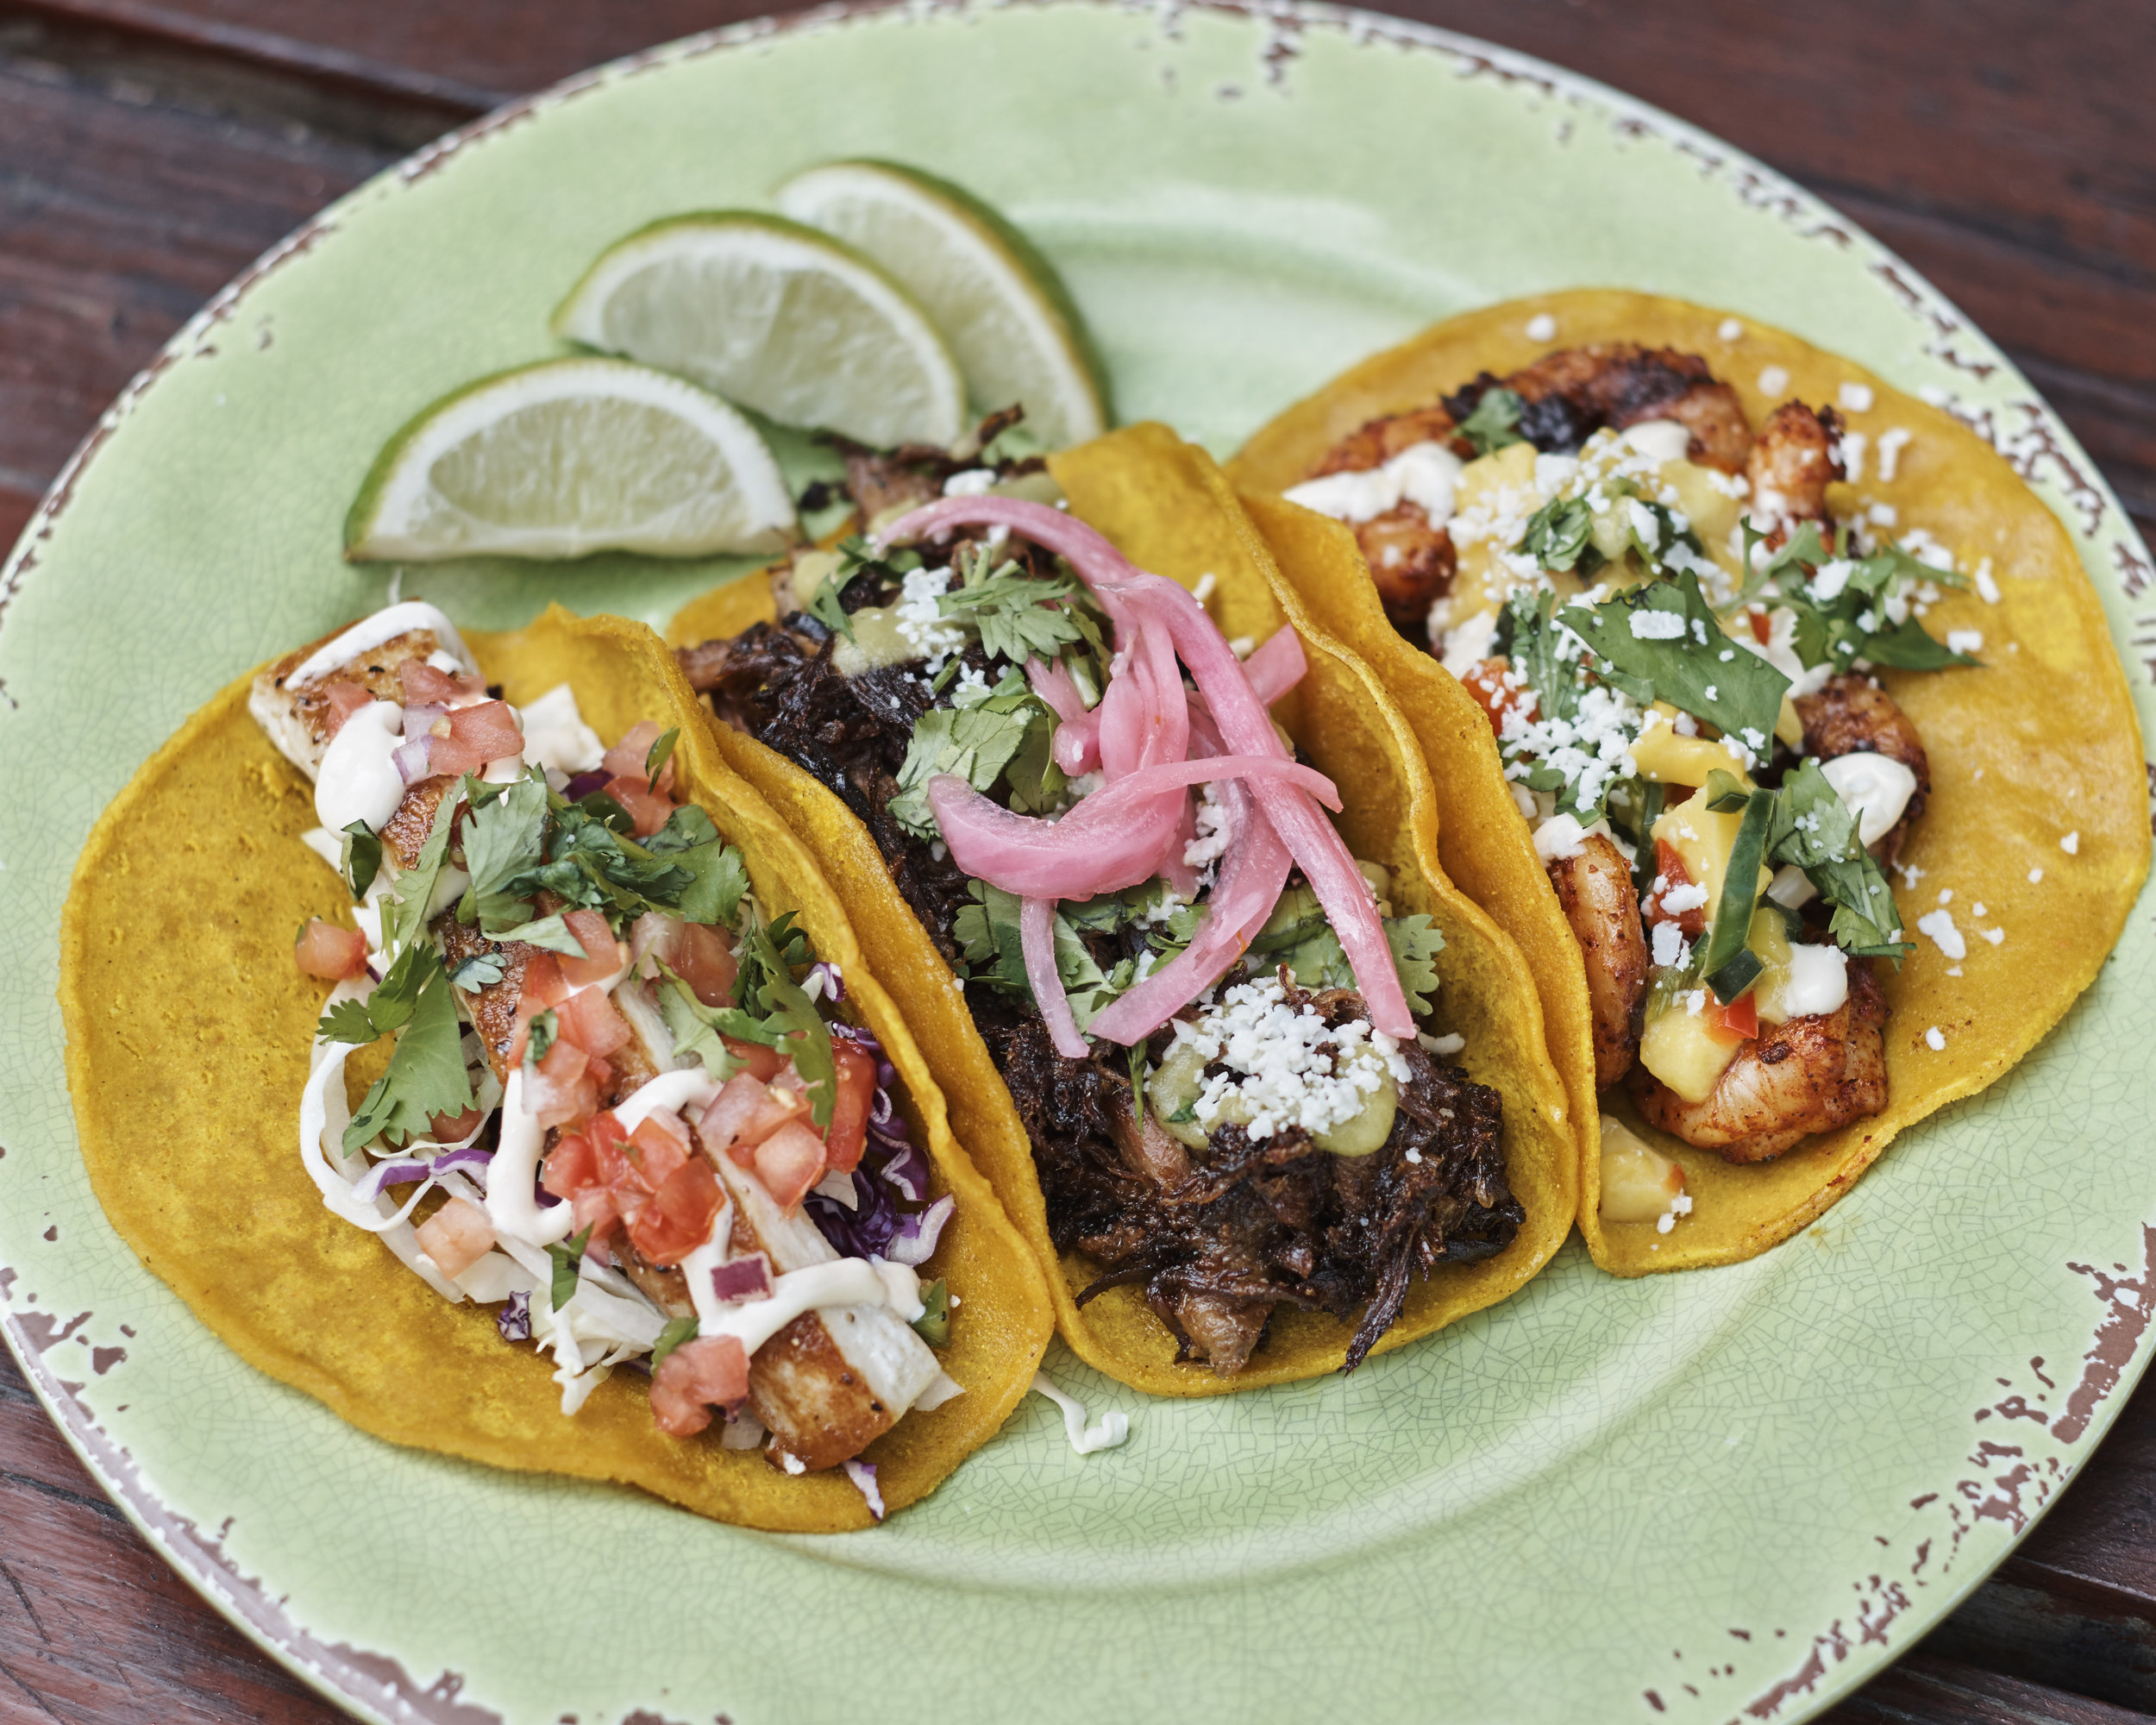  "Authentic Mexican Carne Asada Taco Recipe: A Flavorful Journey into Traditional Mexican Cuisine"